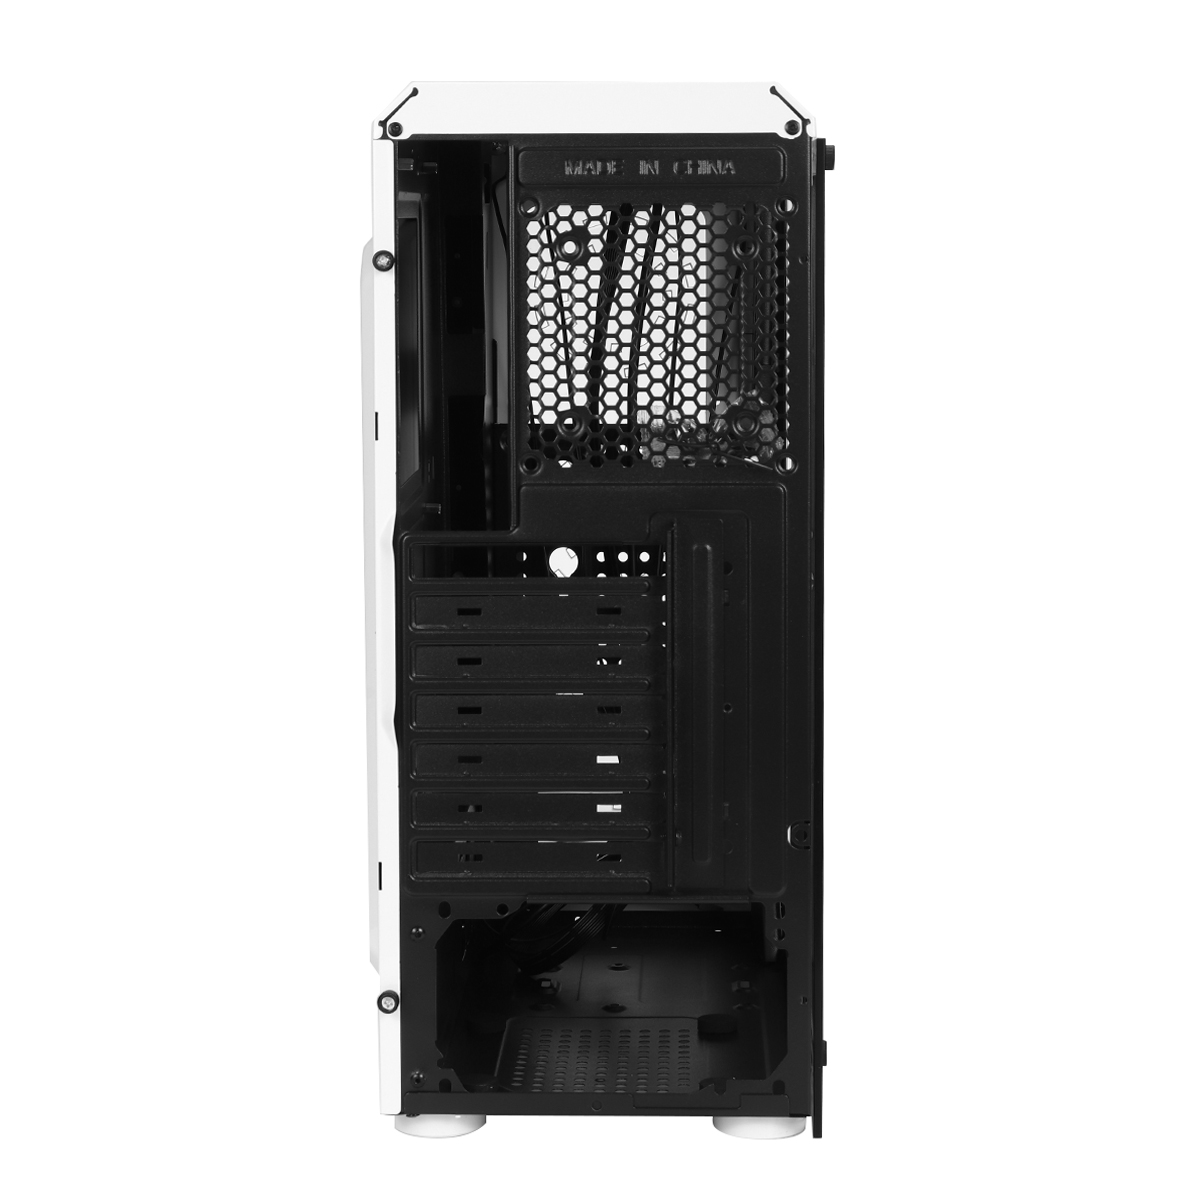 Find Computer PC Case Transparent Glass ATX M ATX CPU SPCC Steel Plate RGB Gaming Case Tower without Fans Radiator for Sale on Gipsybee.com with cryptocurrencies